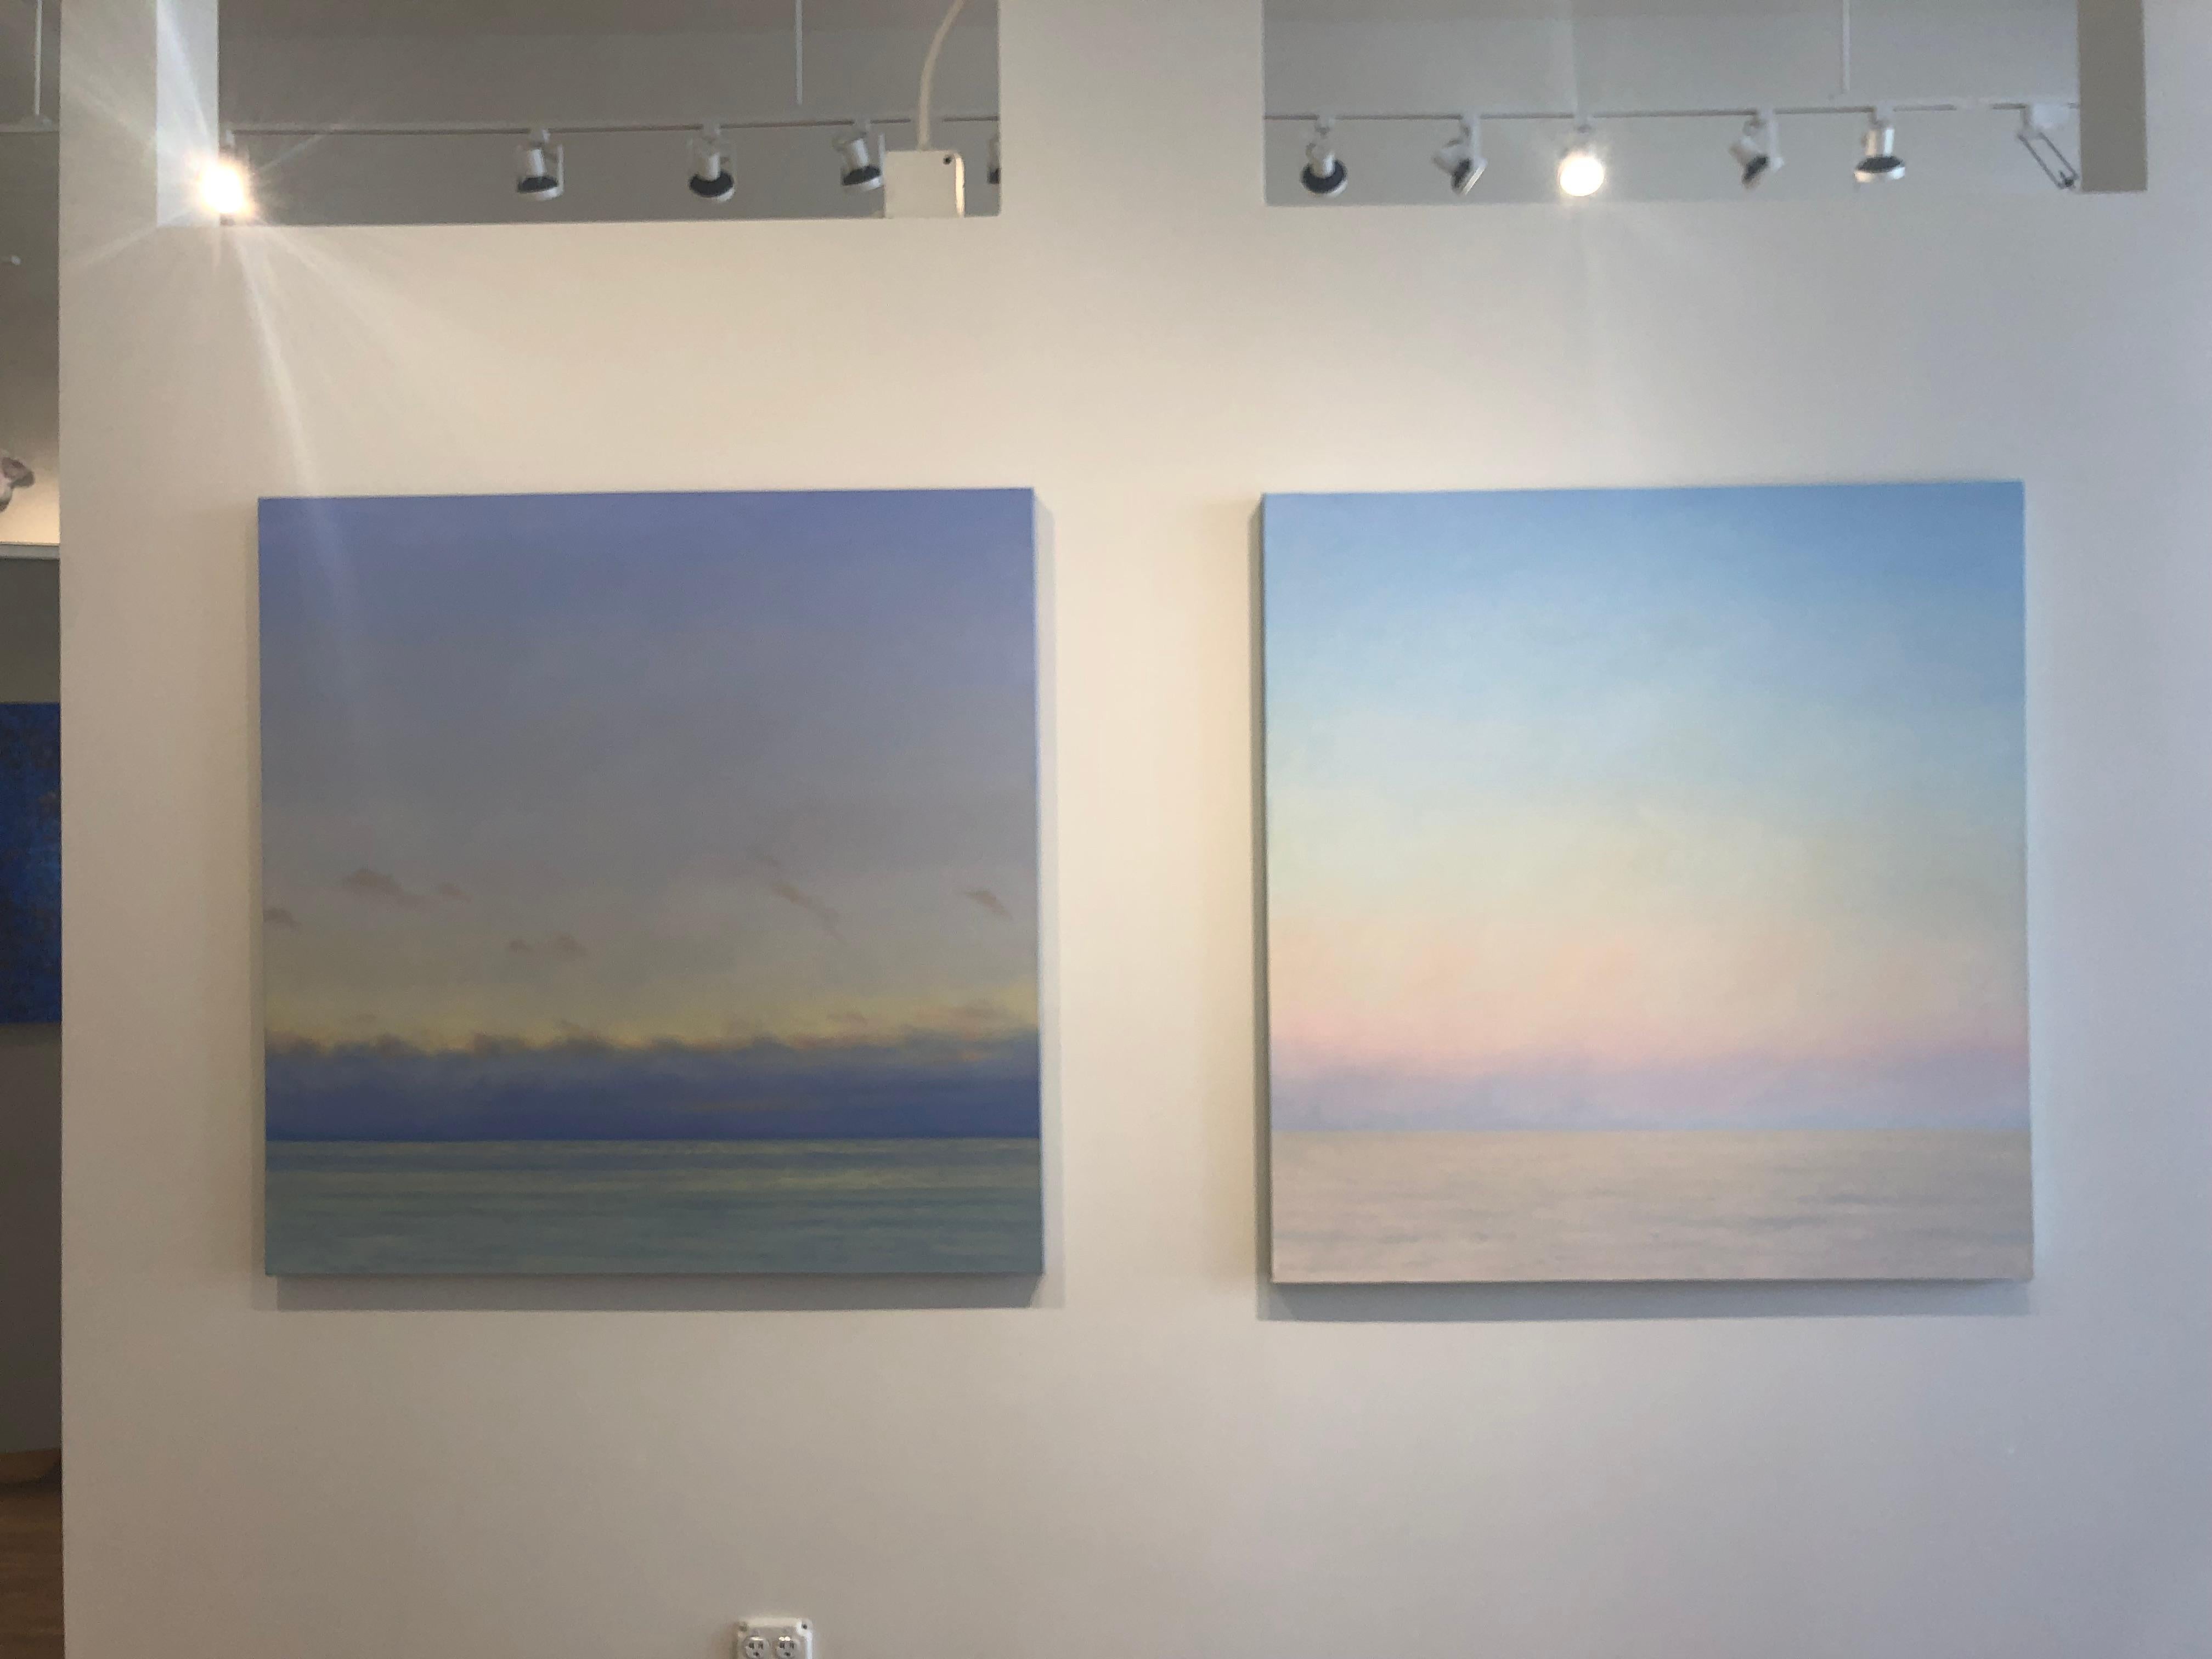 Serene and calm sky, ocean horizon, sunrise or sunset sky painting from American Realist Willard Dixon. A contemporary sky scape with clouds and etherial  light. Like a window to a wide open, brilliant and warm sky, in blue, purple yellow and gold.